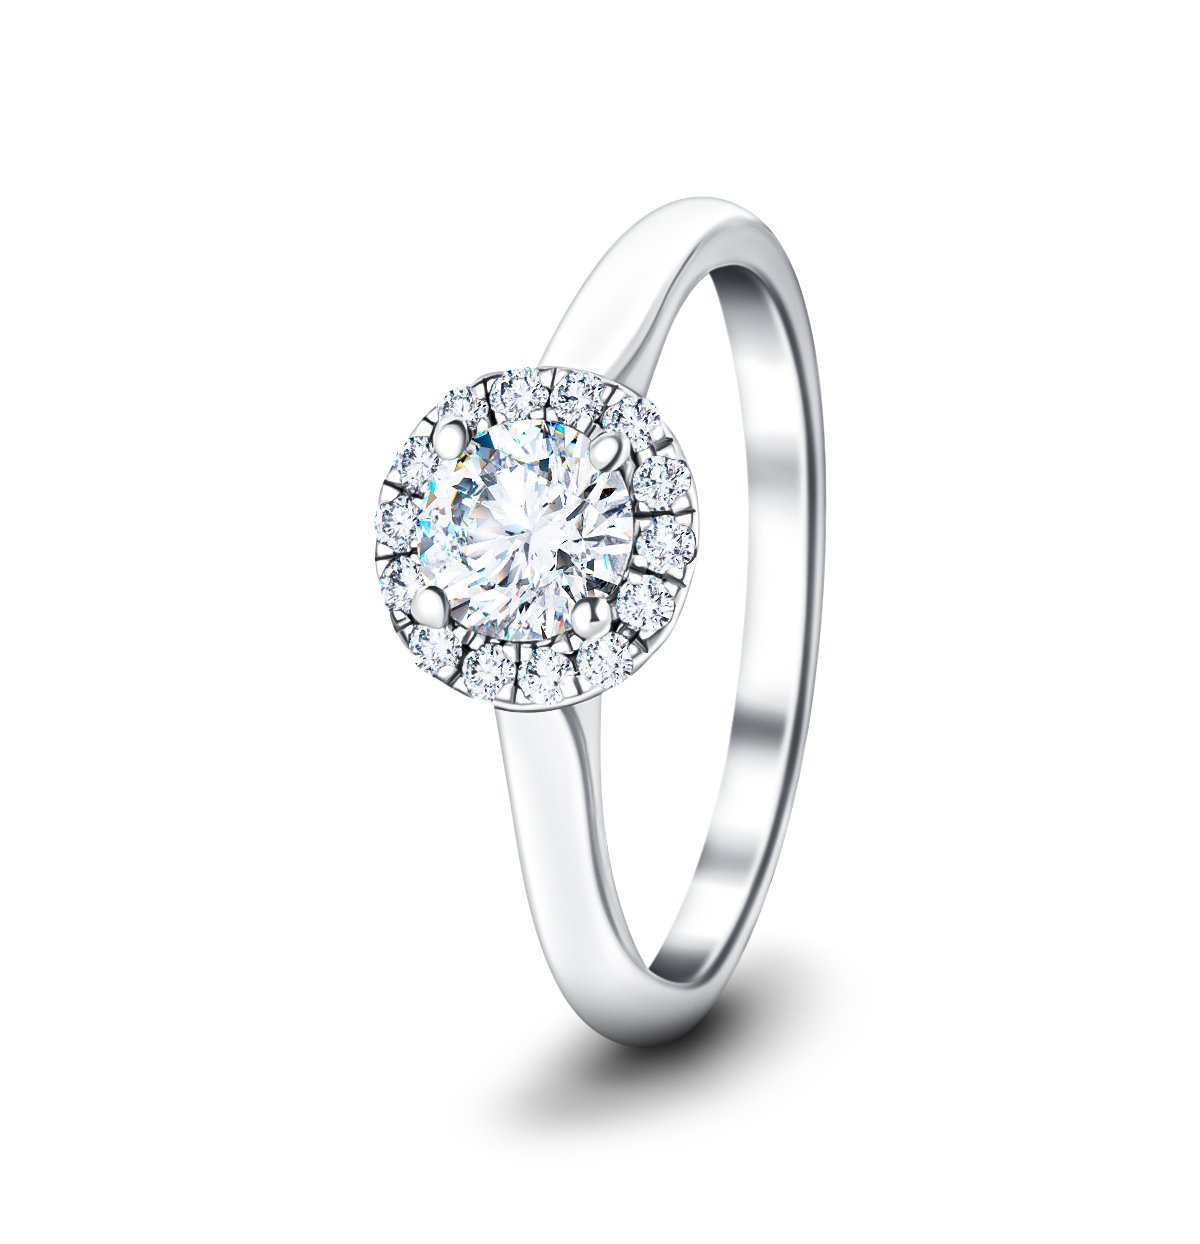 Certified Halo Diamond Engagement Ring with 0.45ct G/SI in 18k